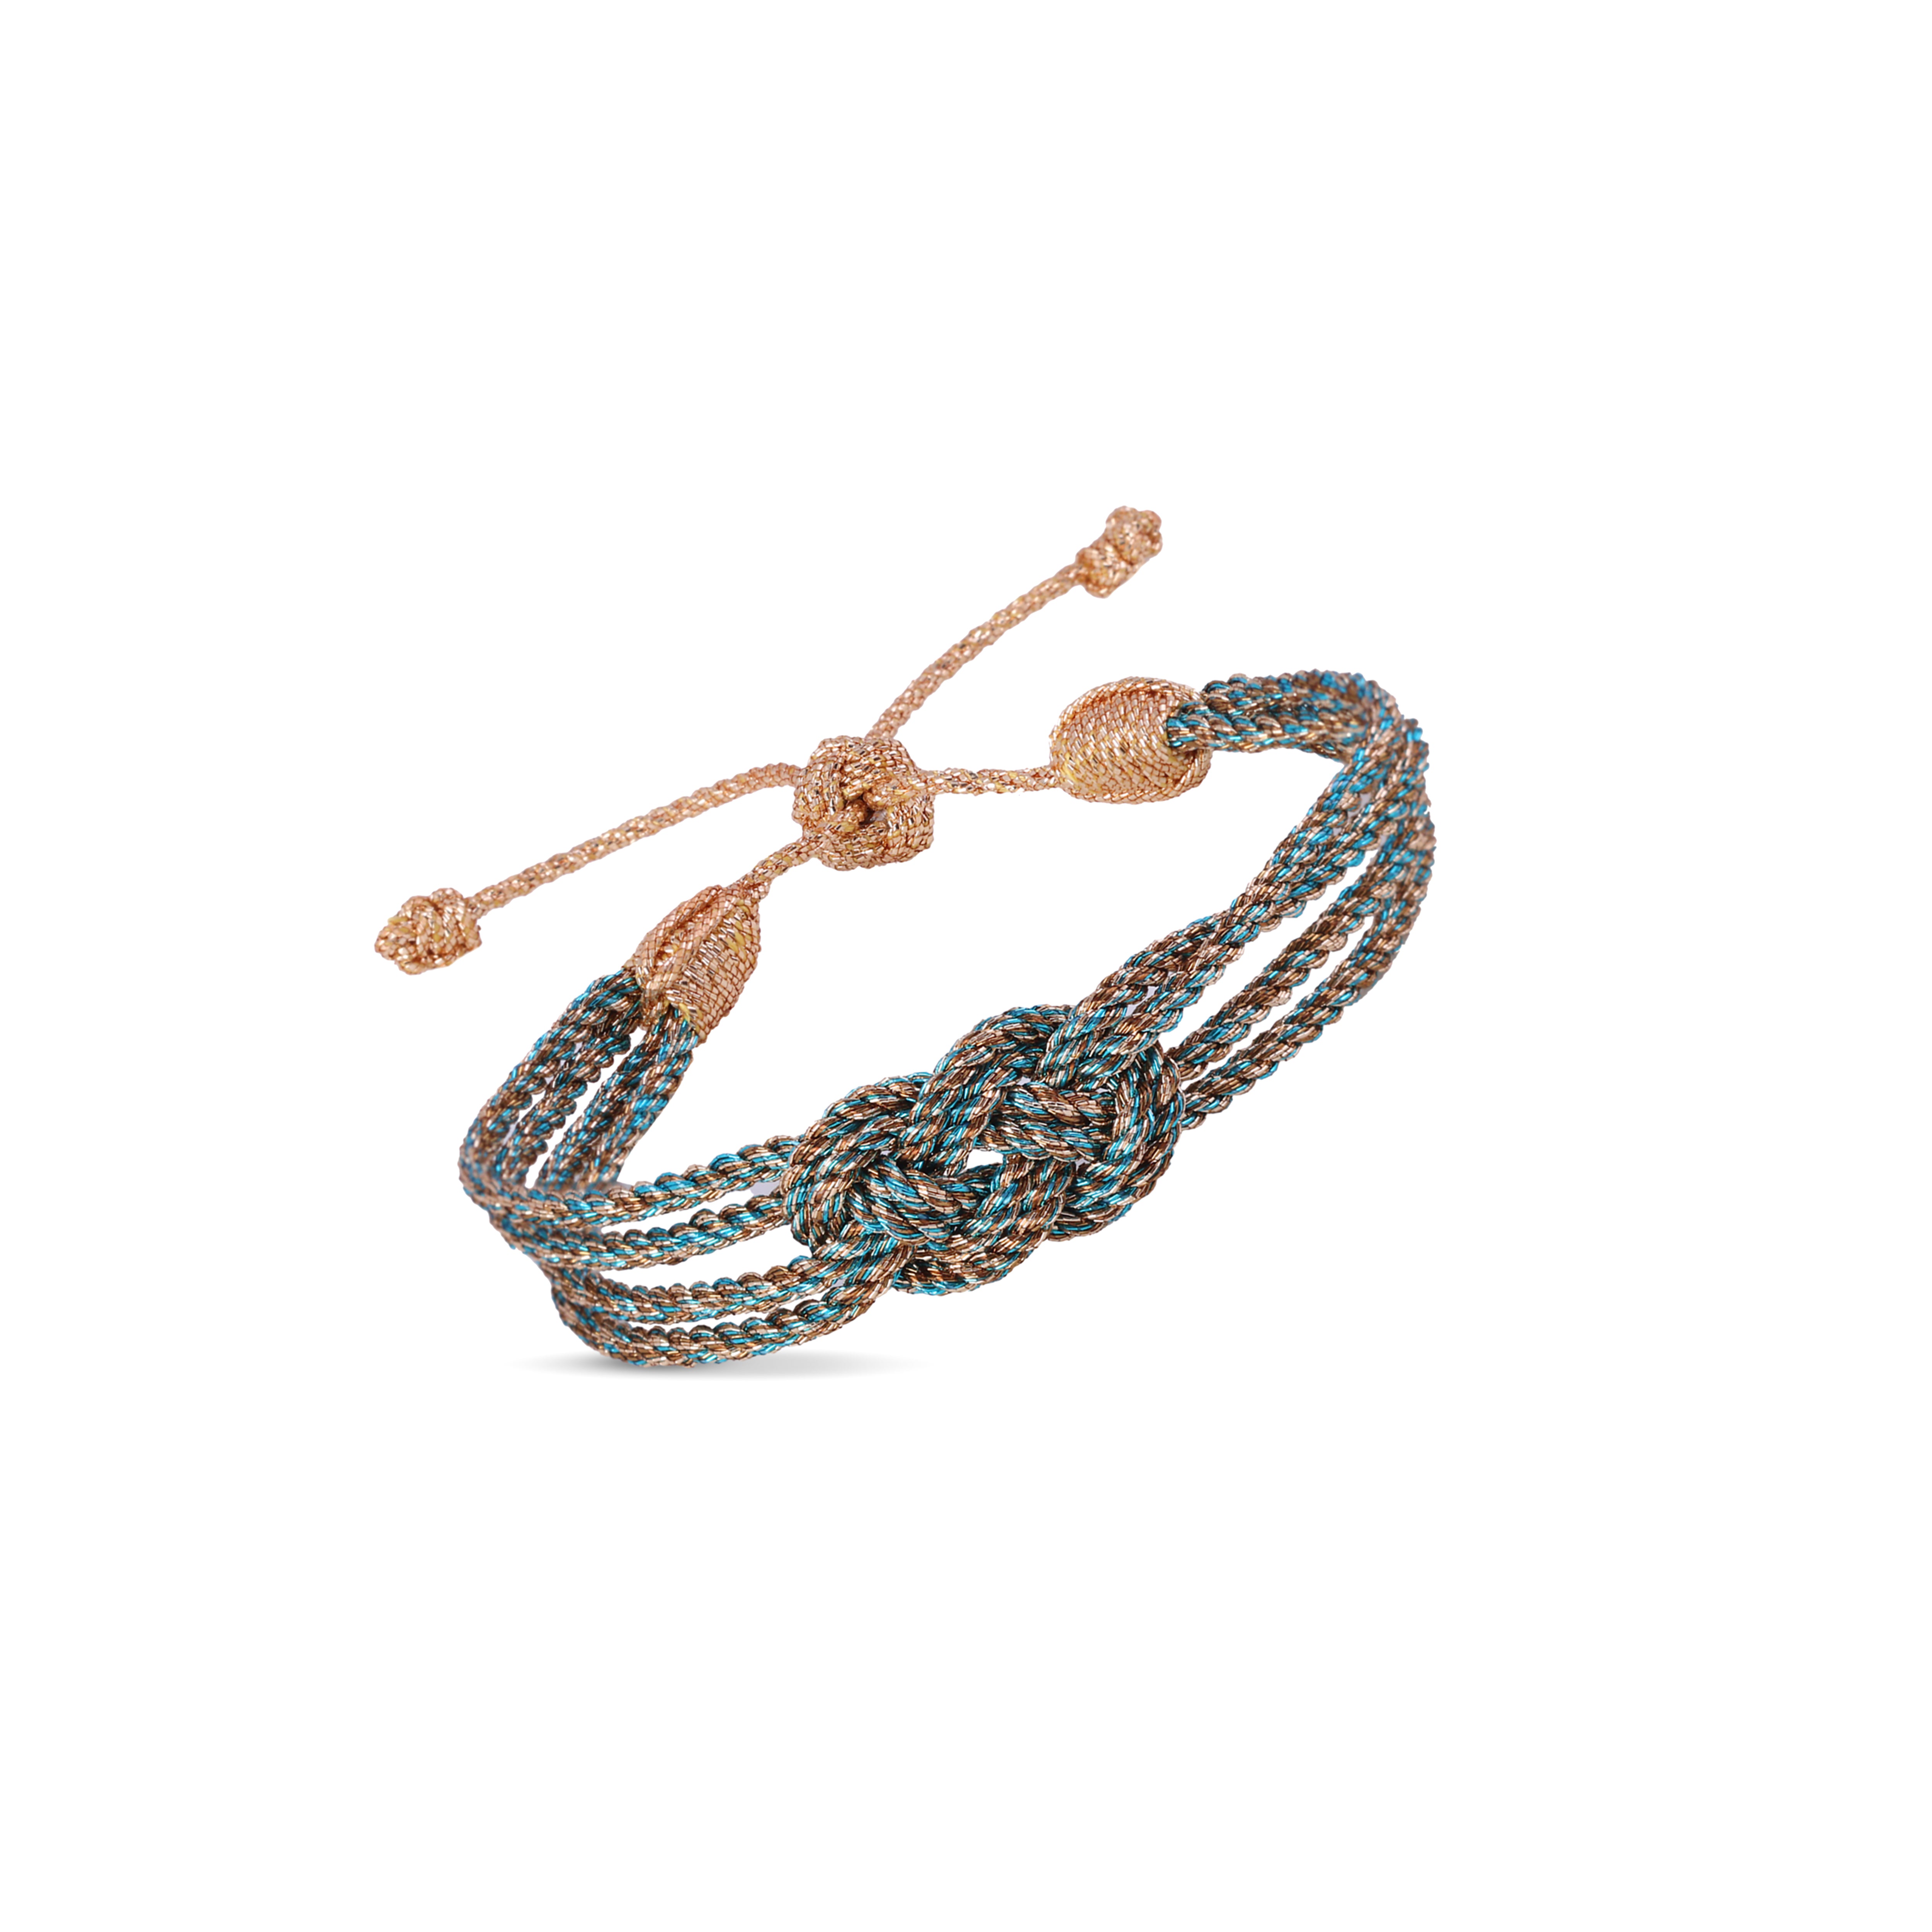 Knot n°1 Bracelet in Peach Turquoise